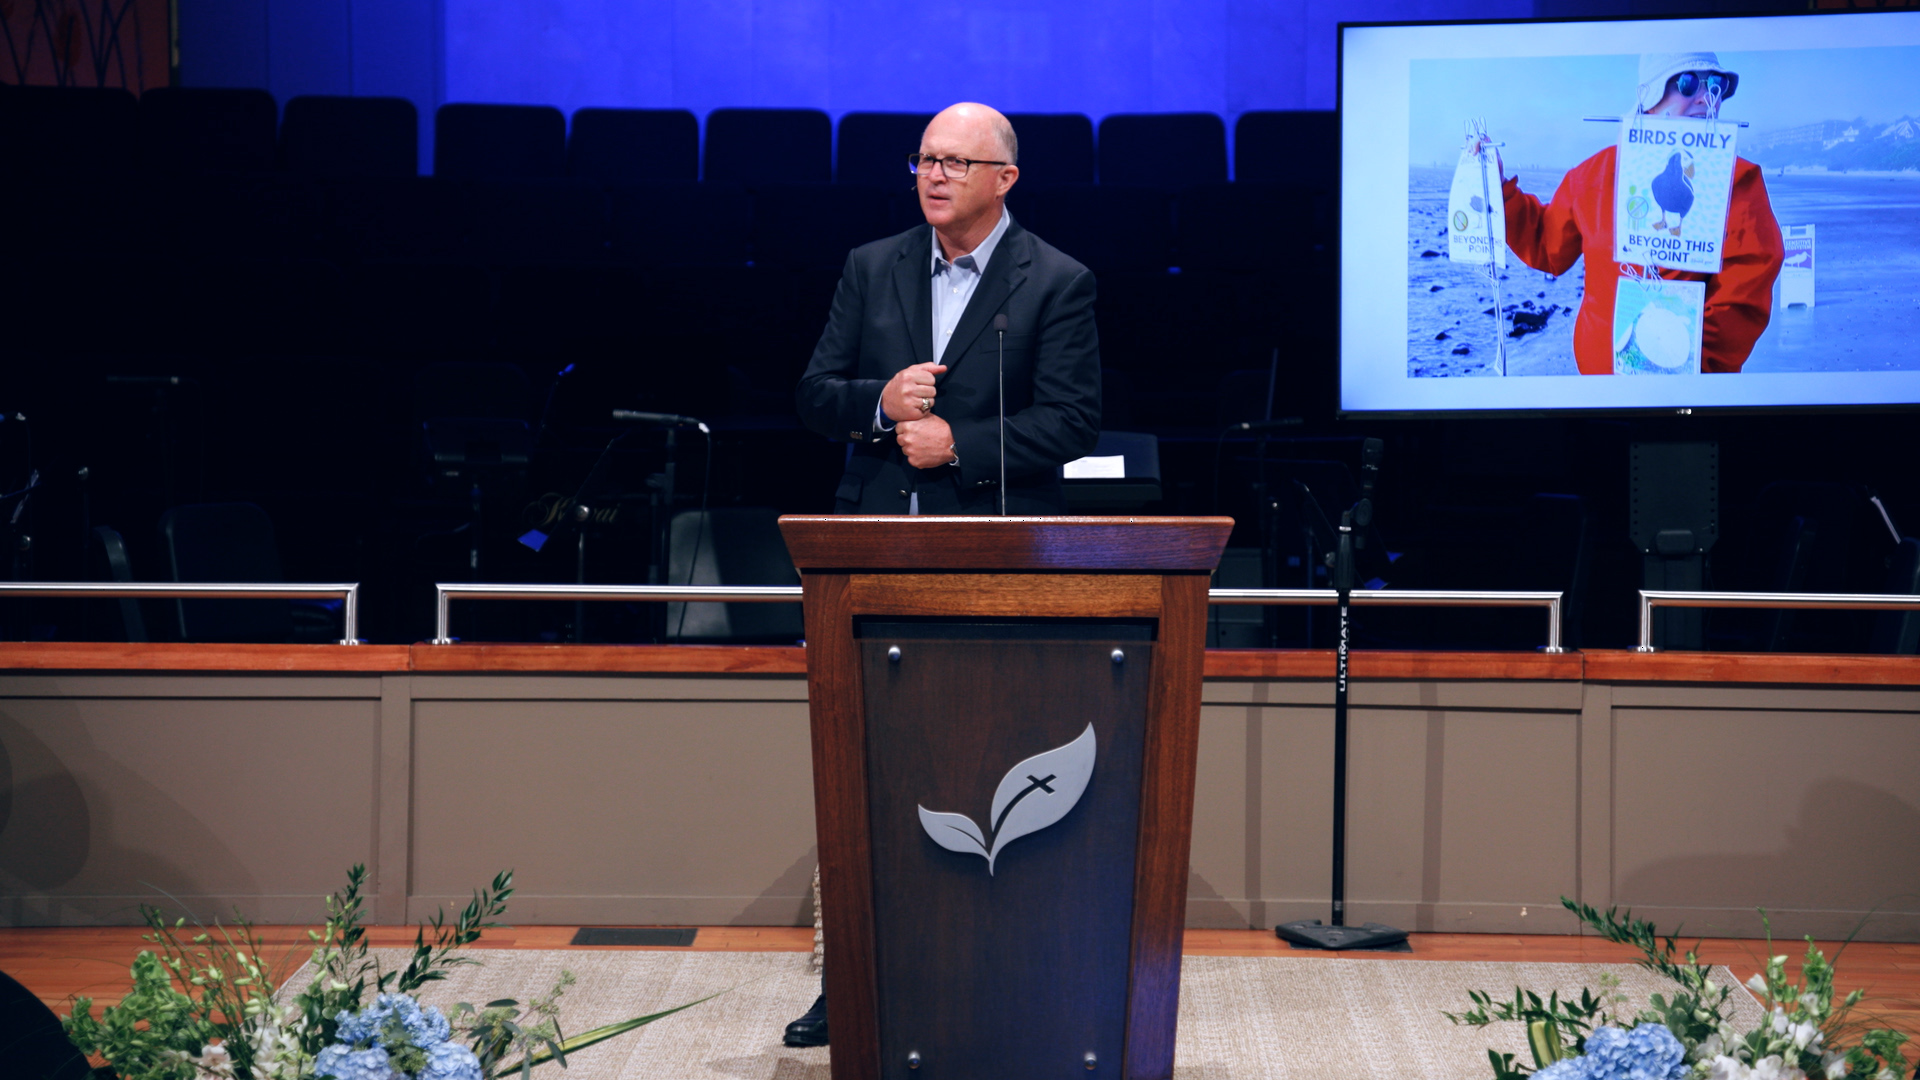 Pastor Paul Chappell: Evangelistic Collaboration in the Local Church